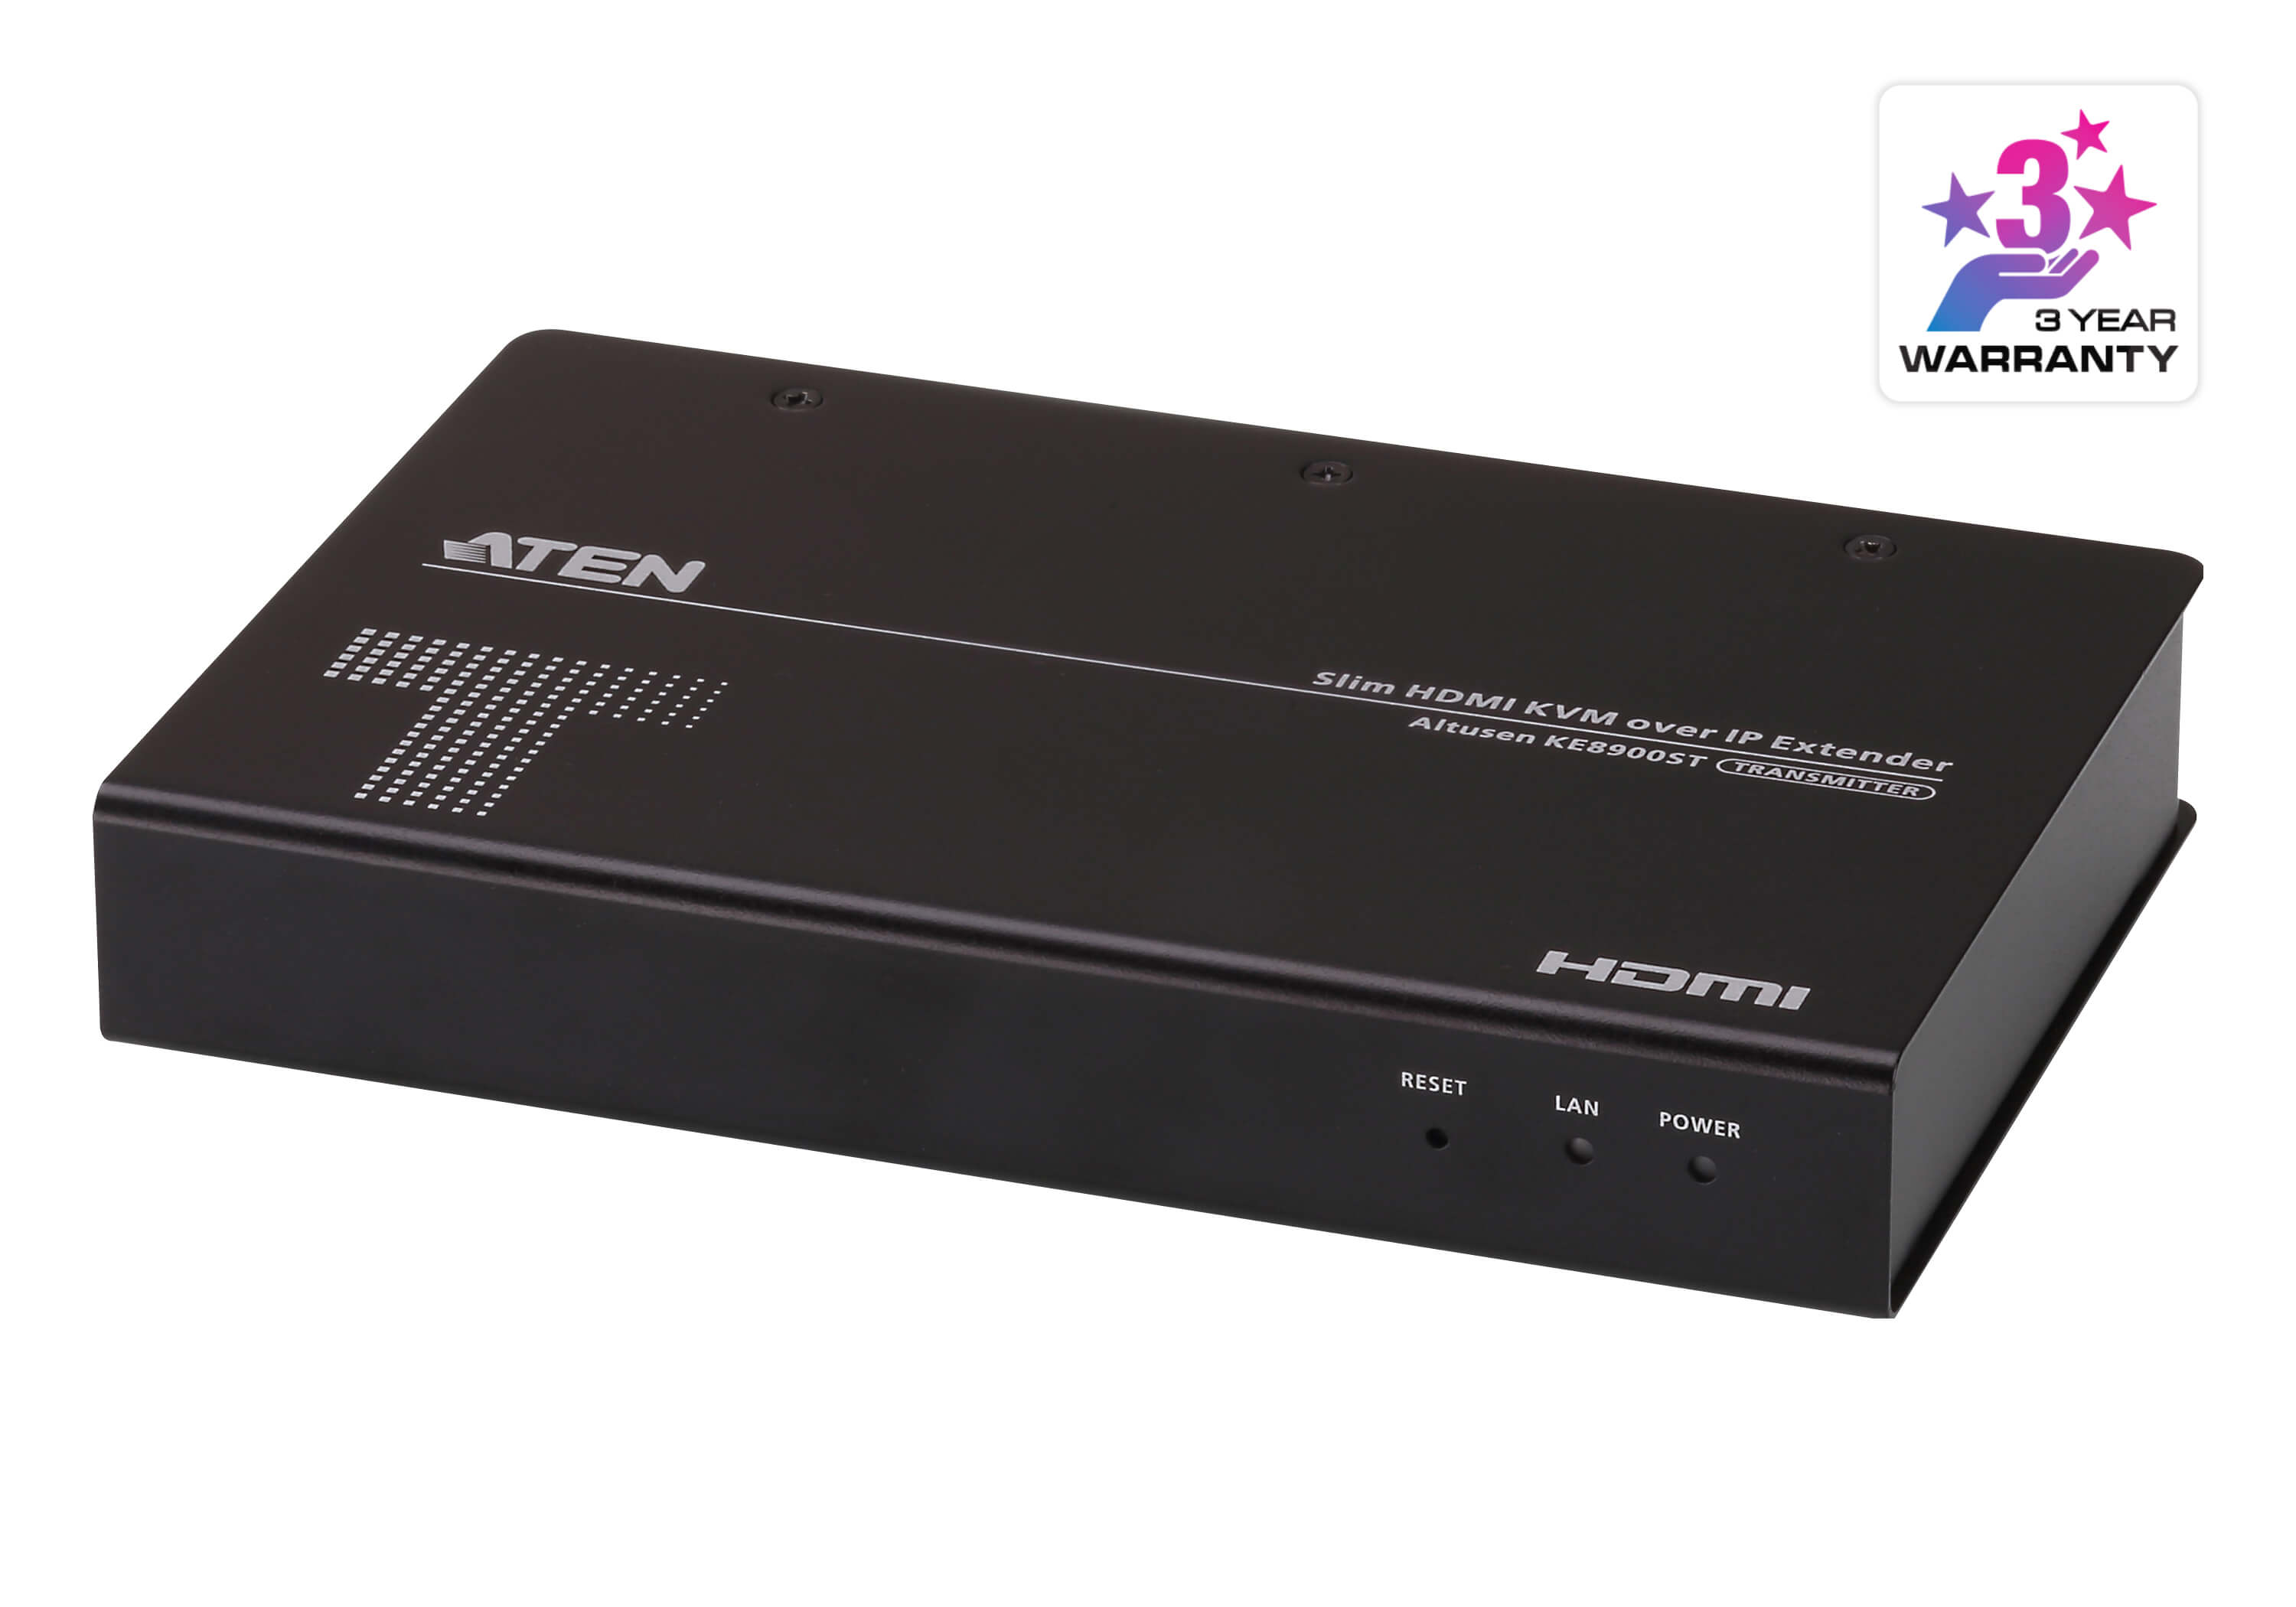 Aten HDMI Slim KVM over IP Transmitter, supports up to 1920 x 1200 @ 60 Hz